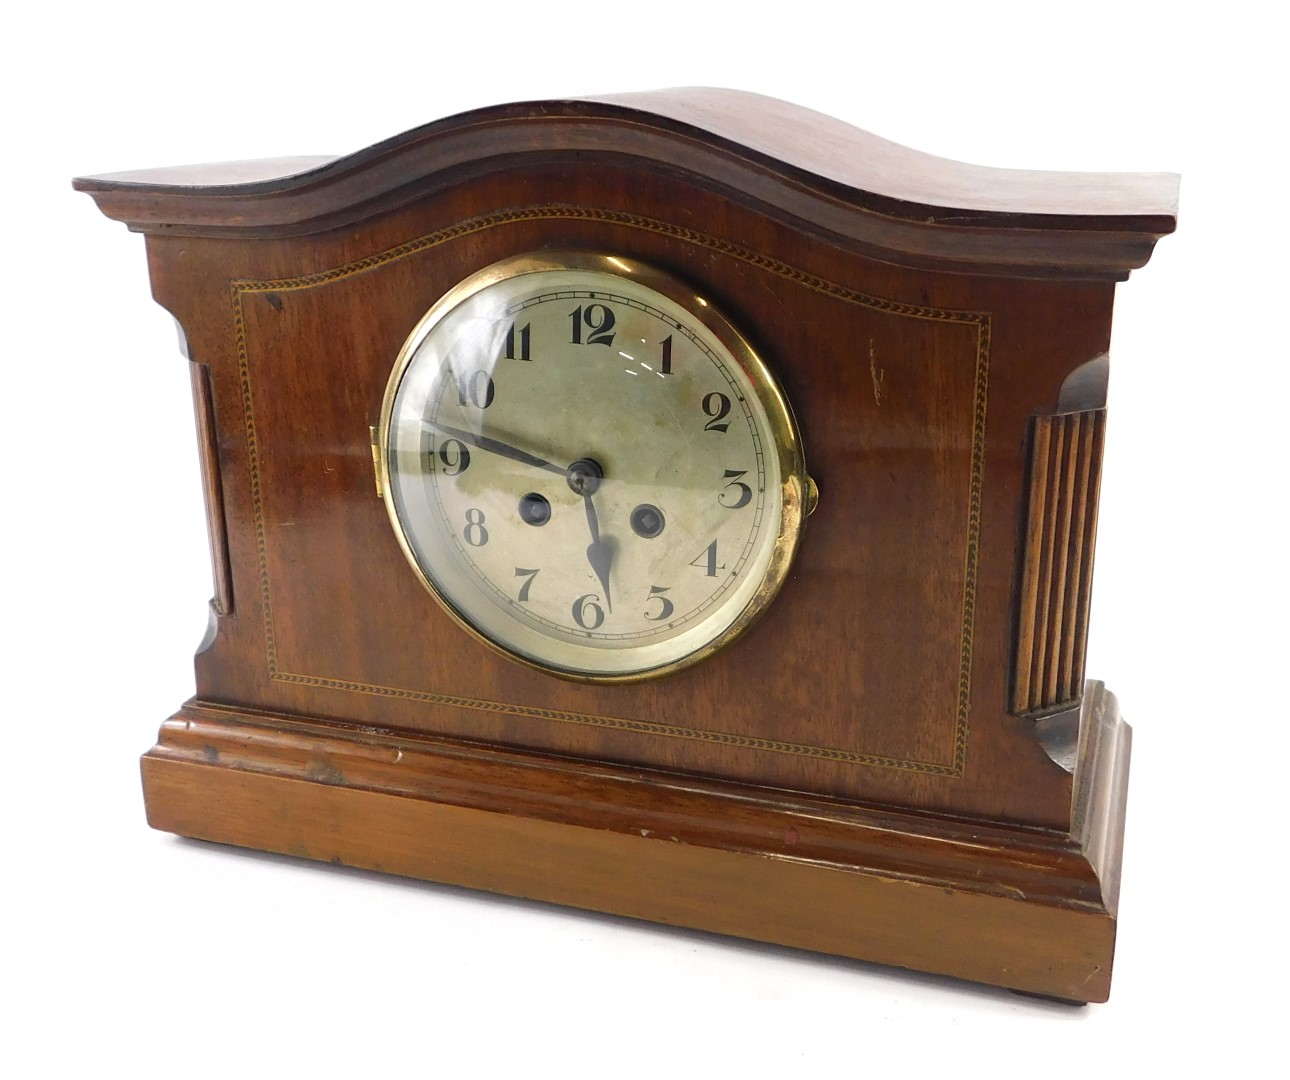 An Edwardian mahogany and chequer banded mantel clock, with a shaped top, silvered dial, on a plinth